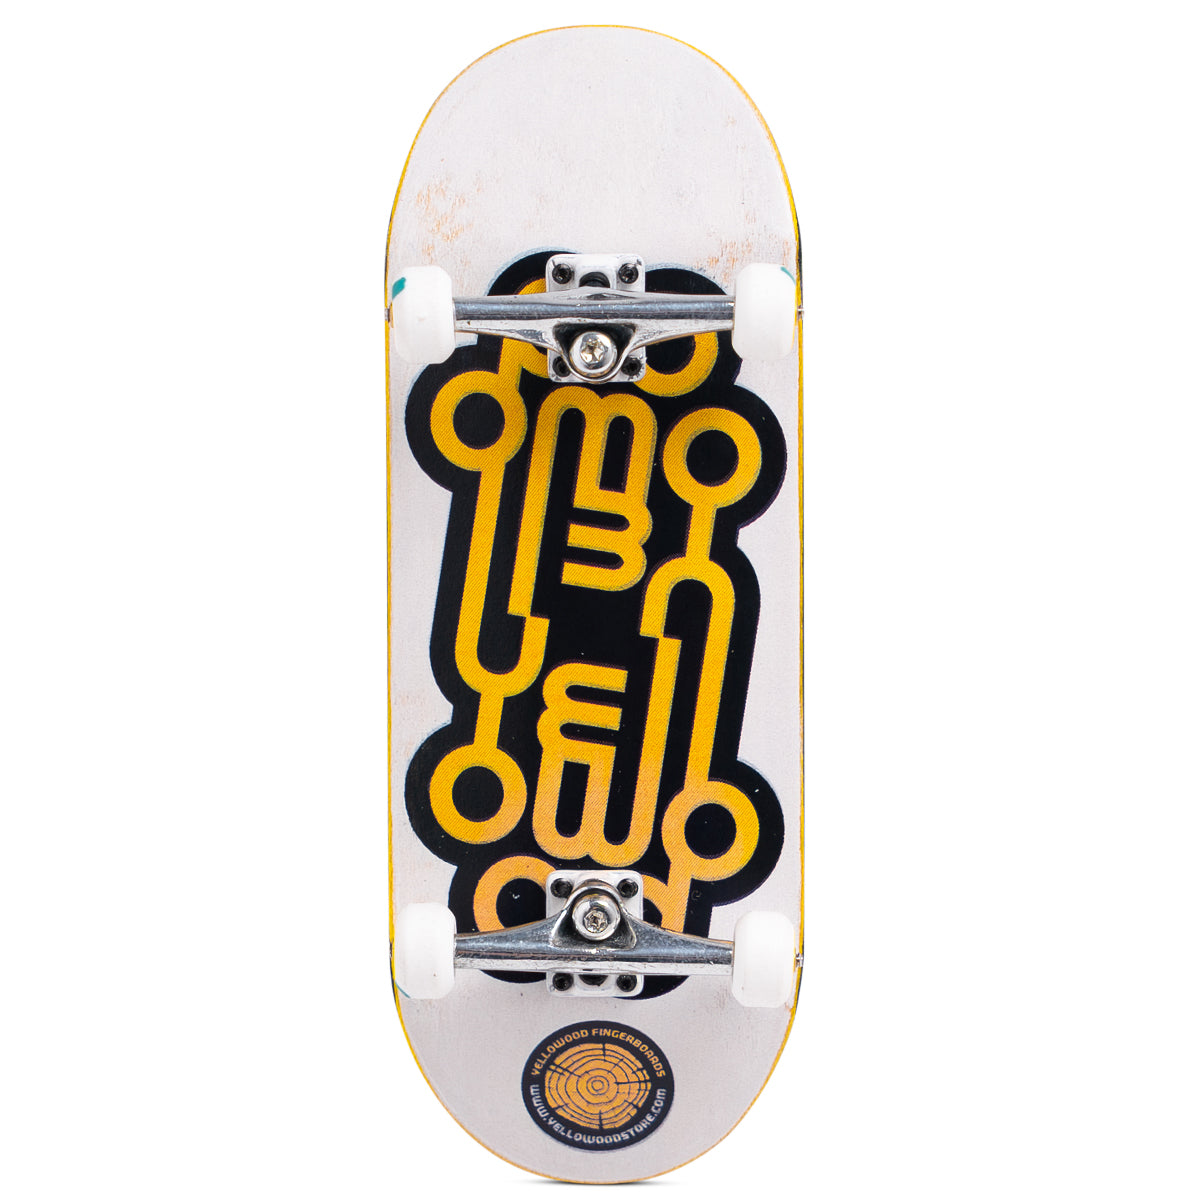 Yellowood Complete Fingerboard